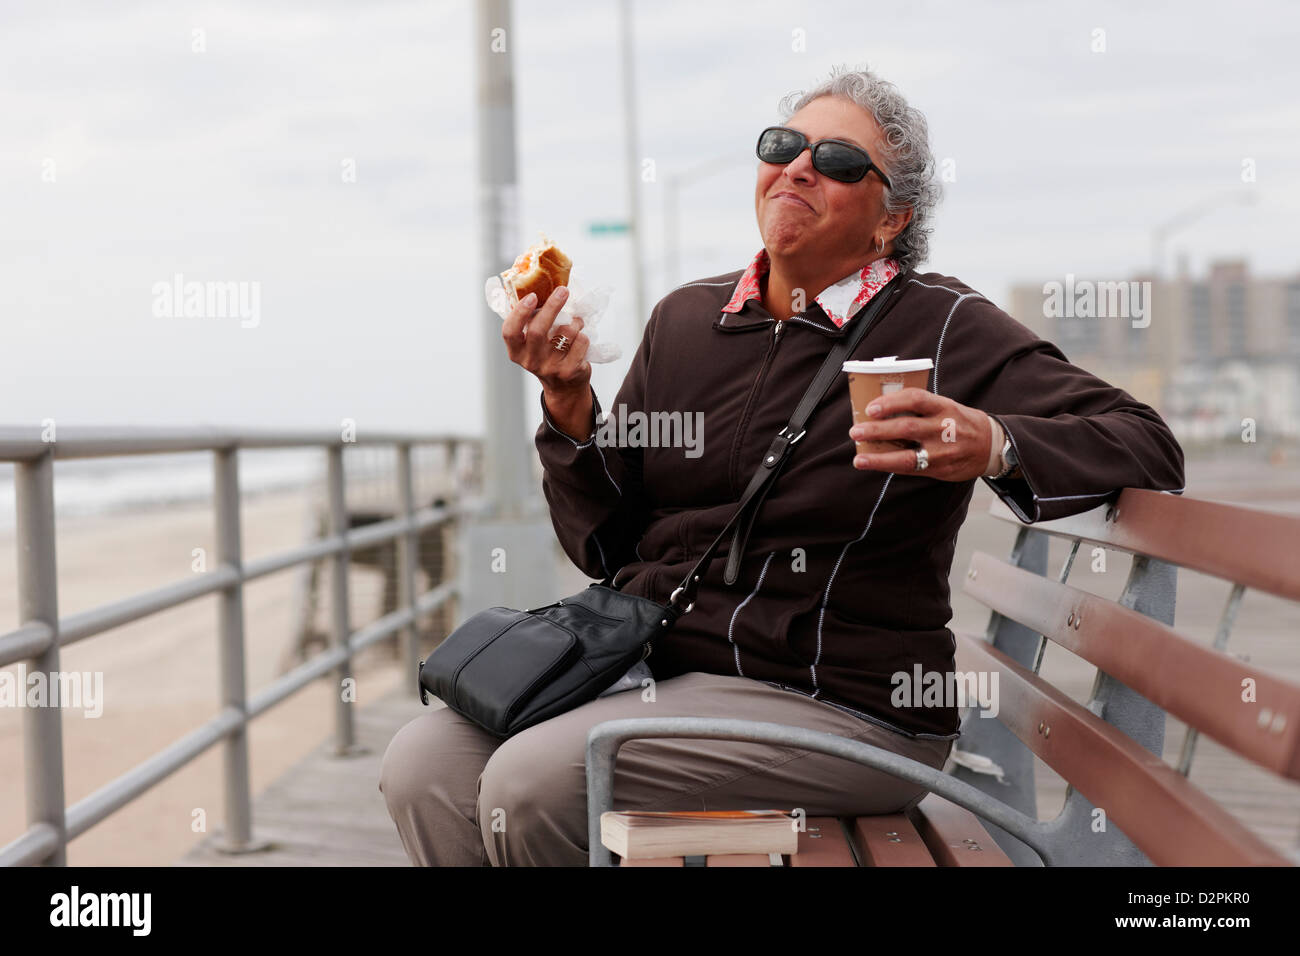 Women eating pastry and drinking coffee on boardwalk Stock Photo